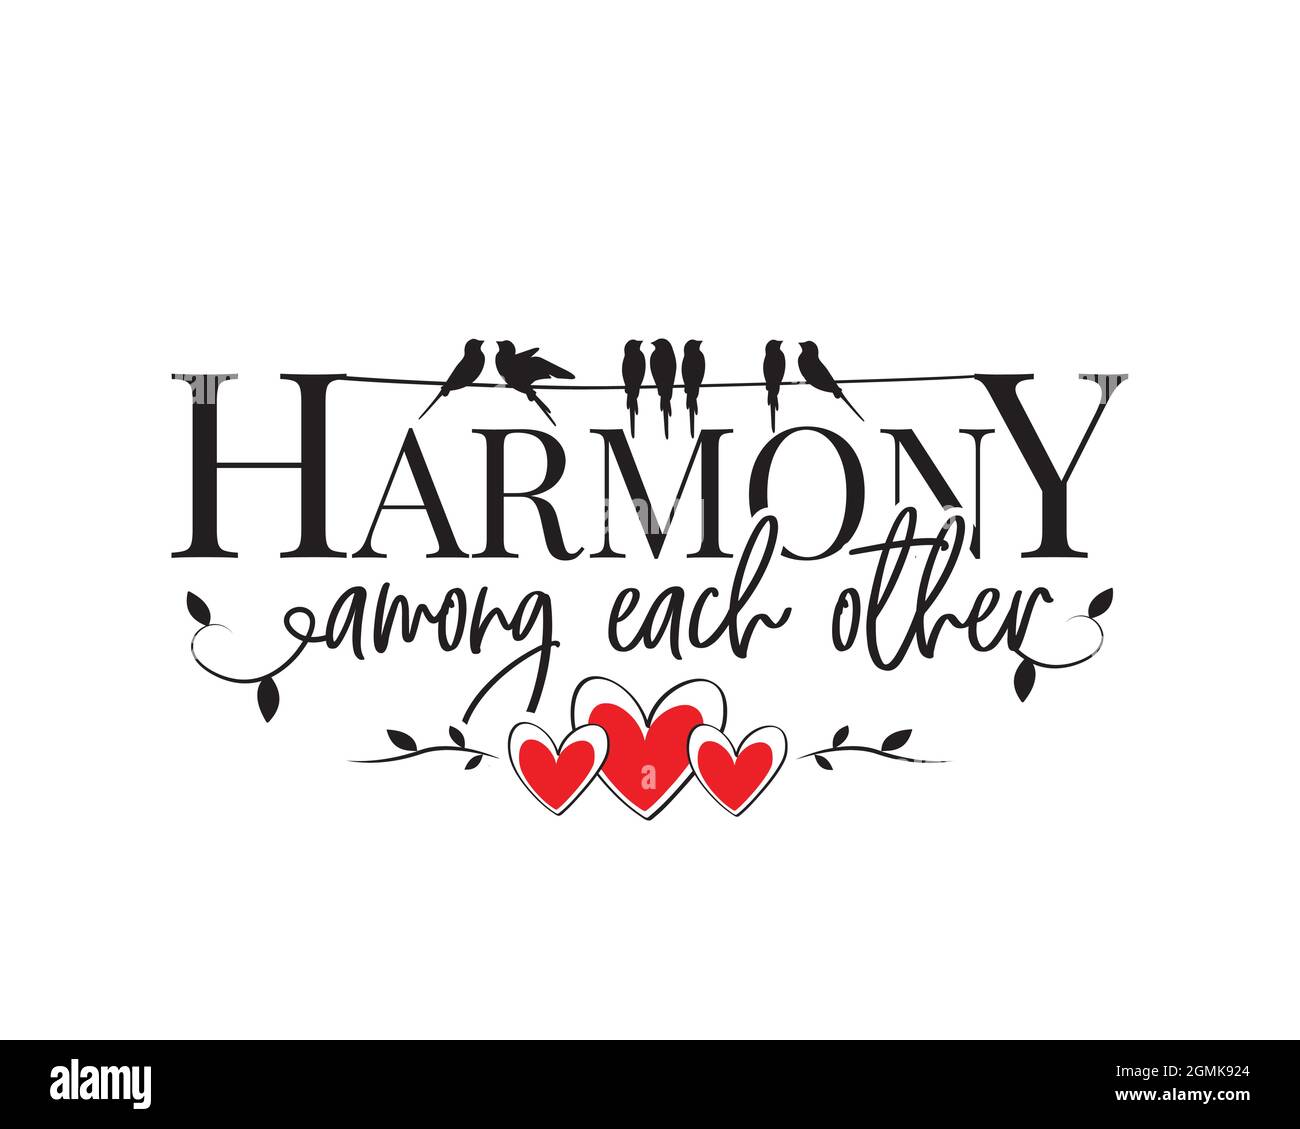 Harmony among each other, vector. Motivational inspirational life quotes. Wall art design. Wall decal isolated on white background. Cute poster design Stock Vector